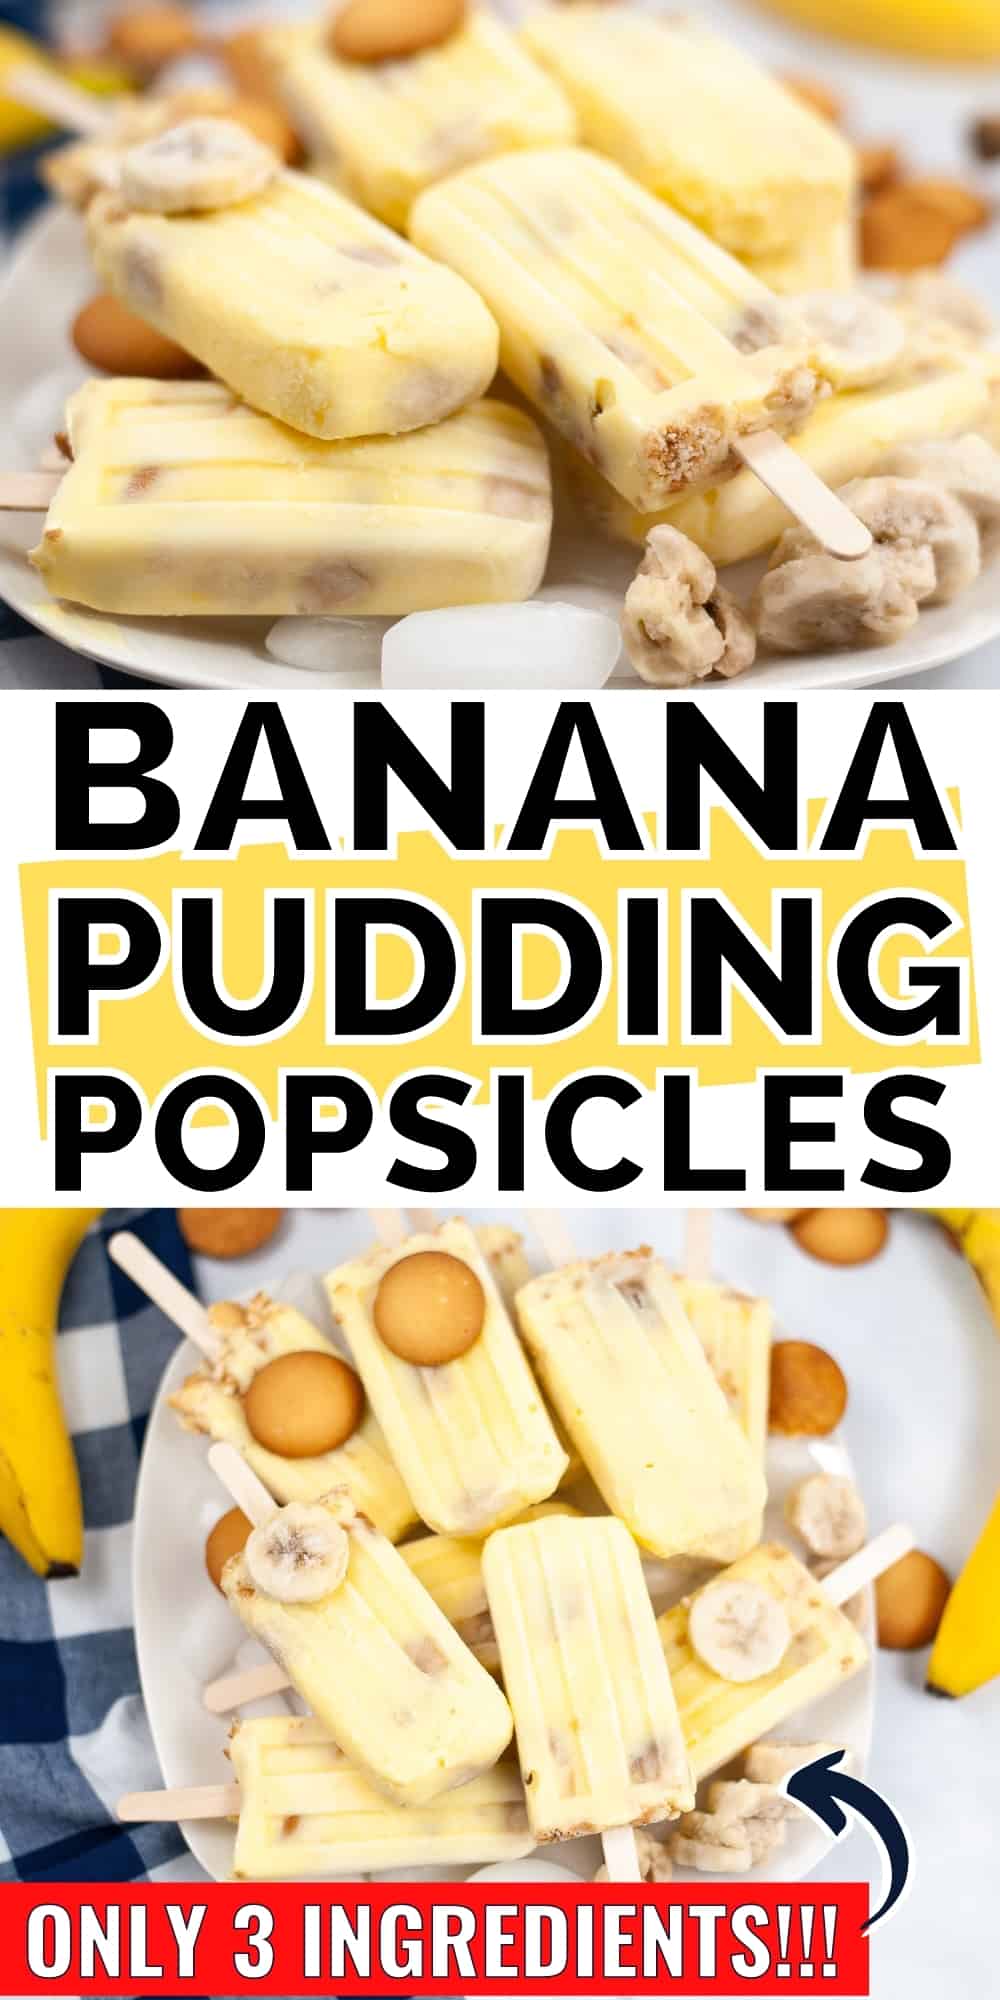 Banana Pudding Popsicles; Only 3 Ingredients!